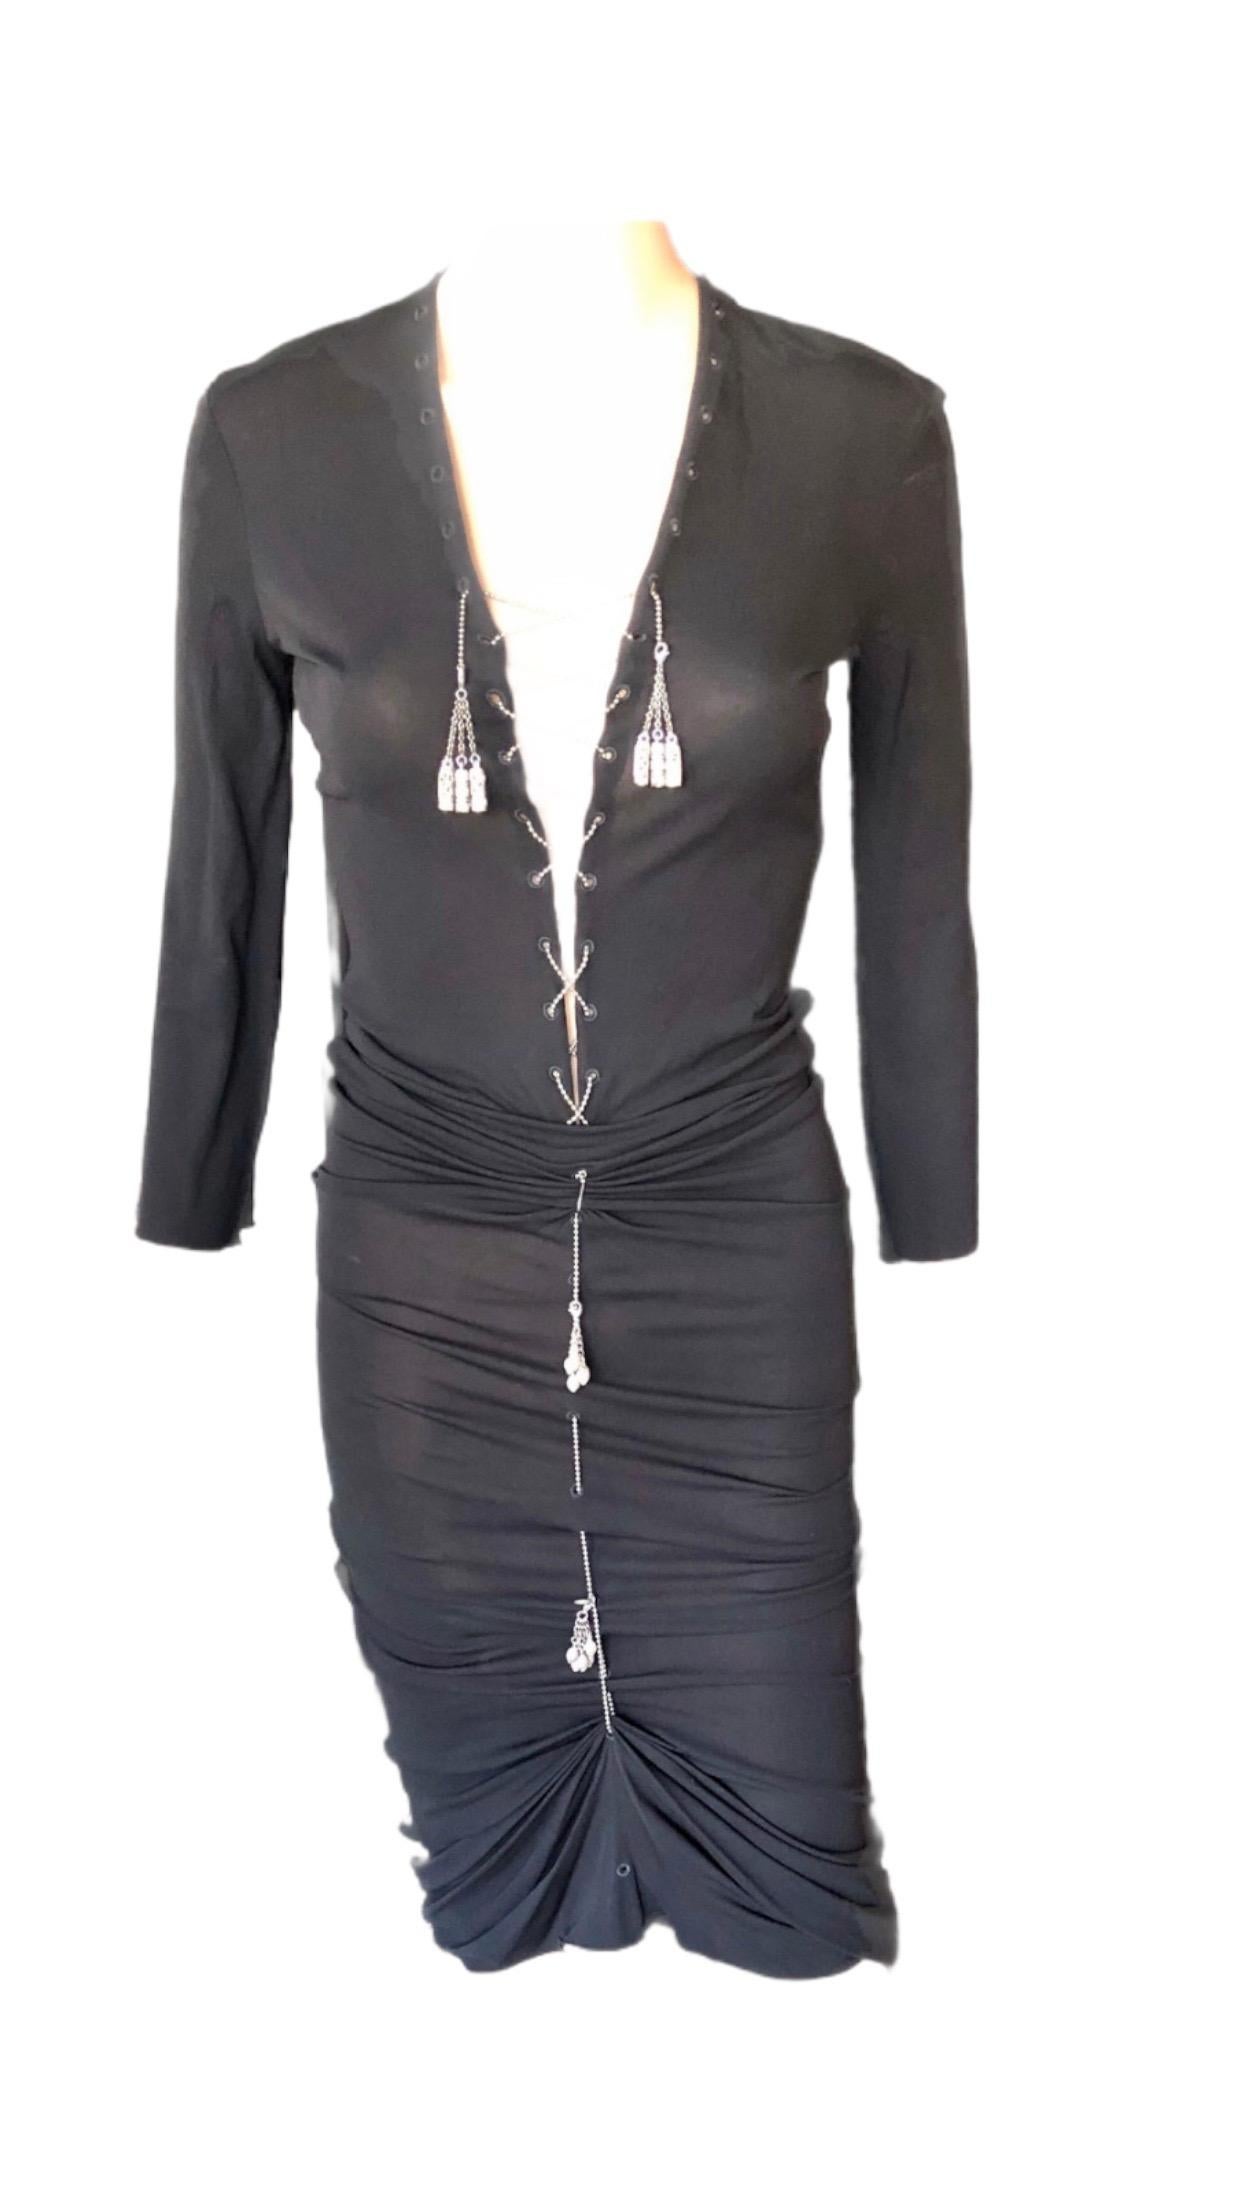 1990's Jean Paul Gaultier Semi-Sheer Lace Up Metal Chain Embellished Black Knit Dress IT 42

Jean Paul Gaultier maxi dress with V-neck featuring silver-tone metal chain embellishment with tassels at front and long sleeves.